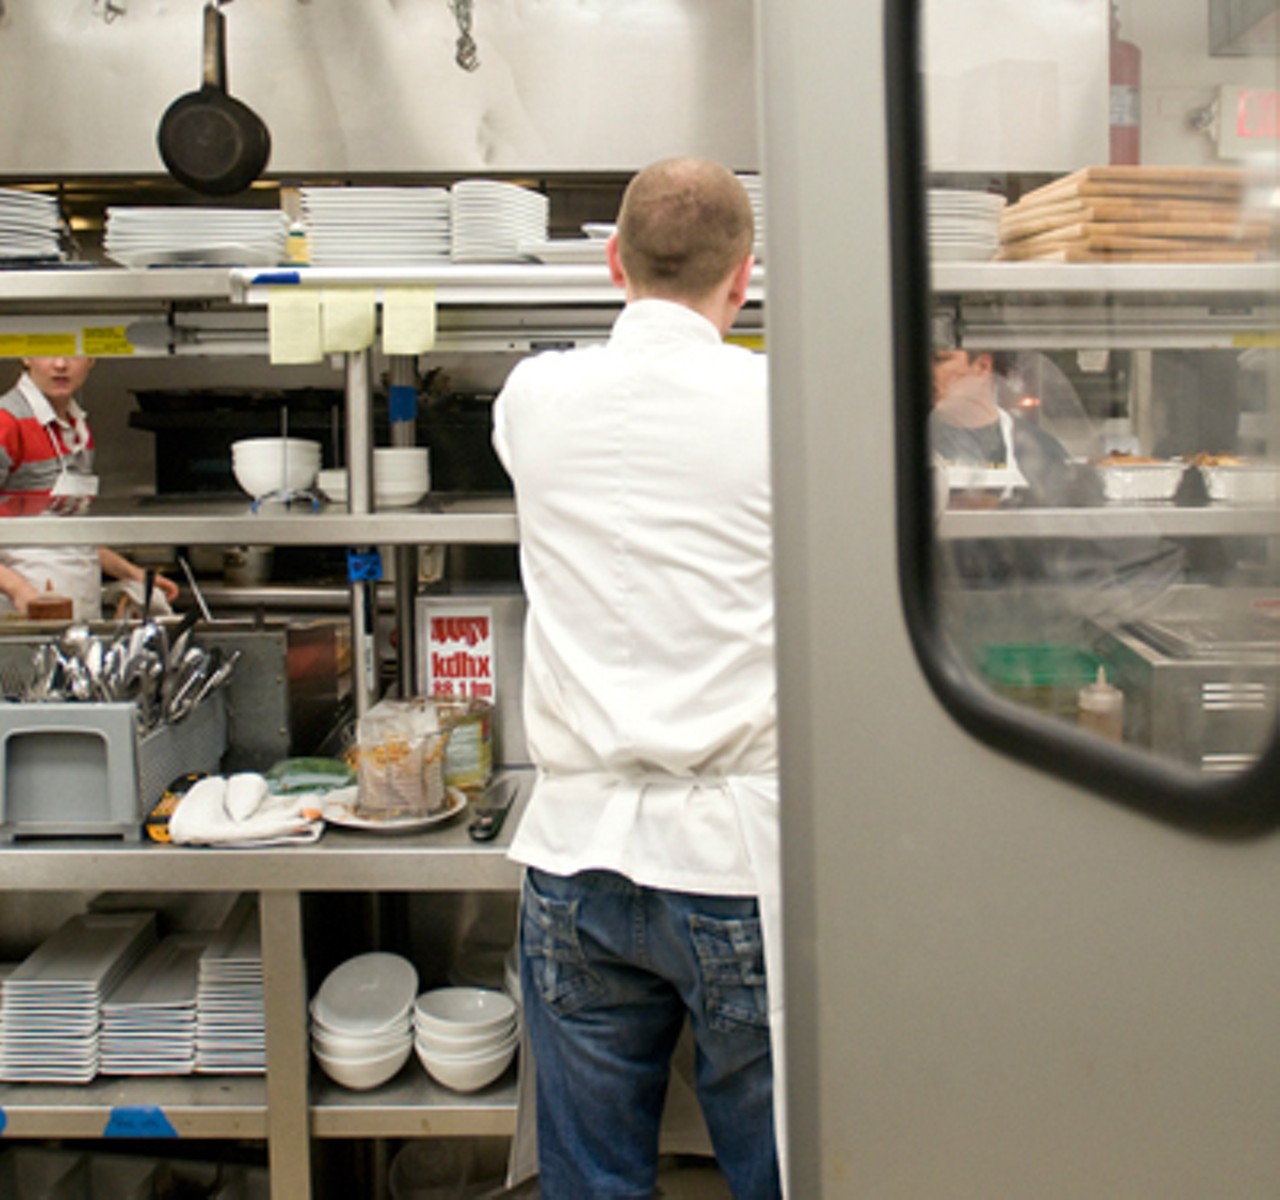 A look inside the kitchen...Read Ian Froeb's review: "Quack Quack: The Shaved Duck reinvented &mdash; and hotter than before."